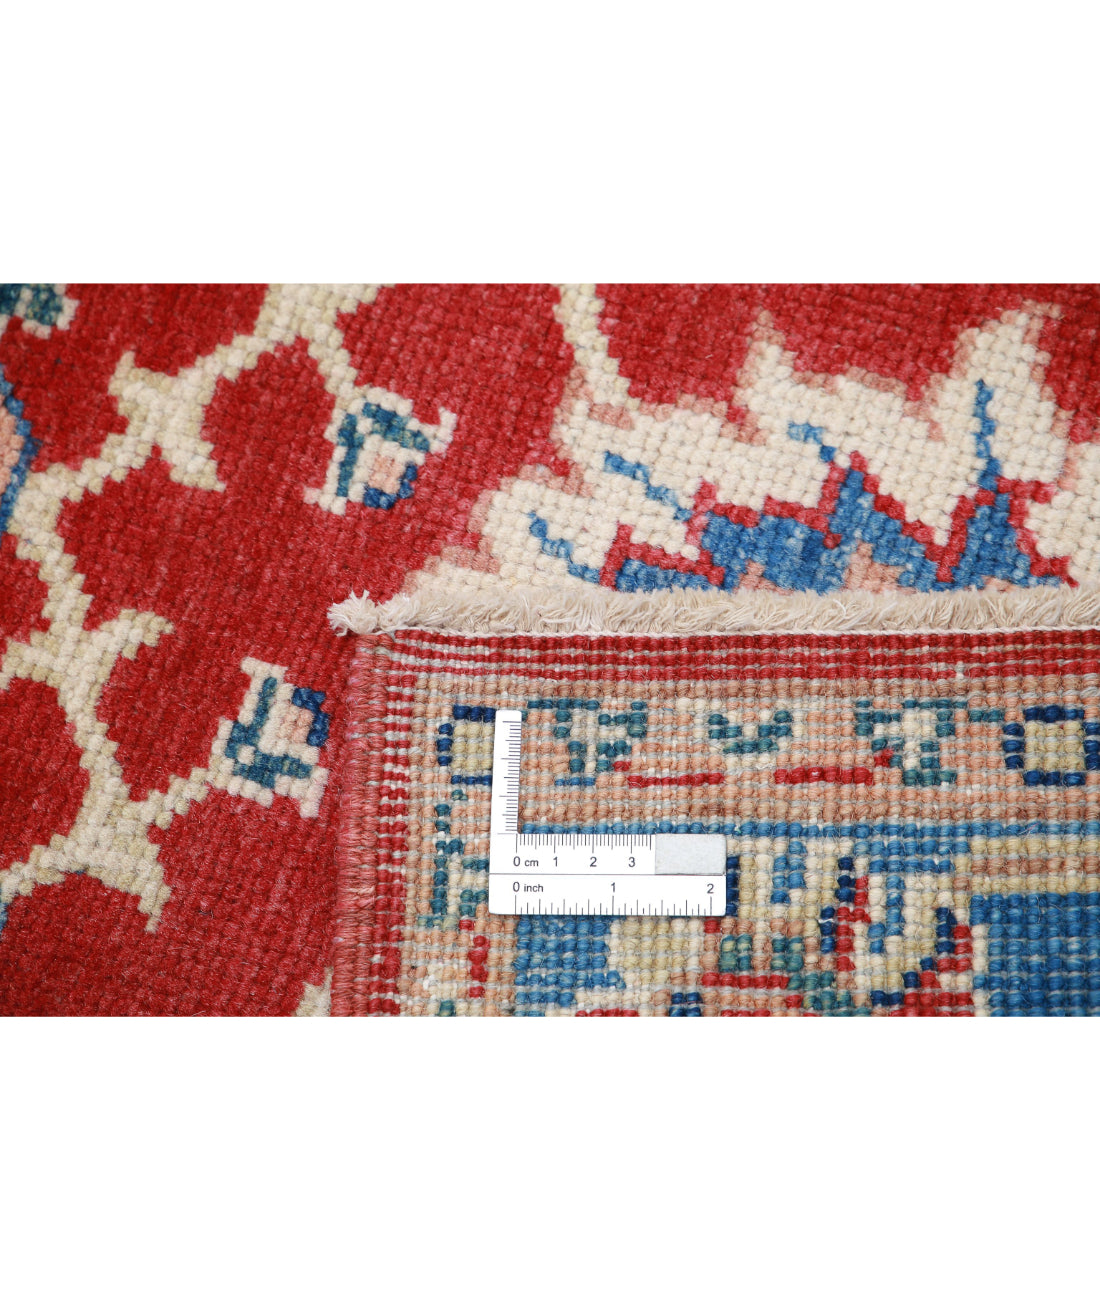 Ziegler 2'7'' X 4'6'' Hand-Knotted Wool Rug 2'7'' x 4'6'' (78 X 135) / Red / N/A